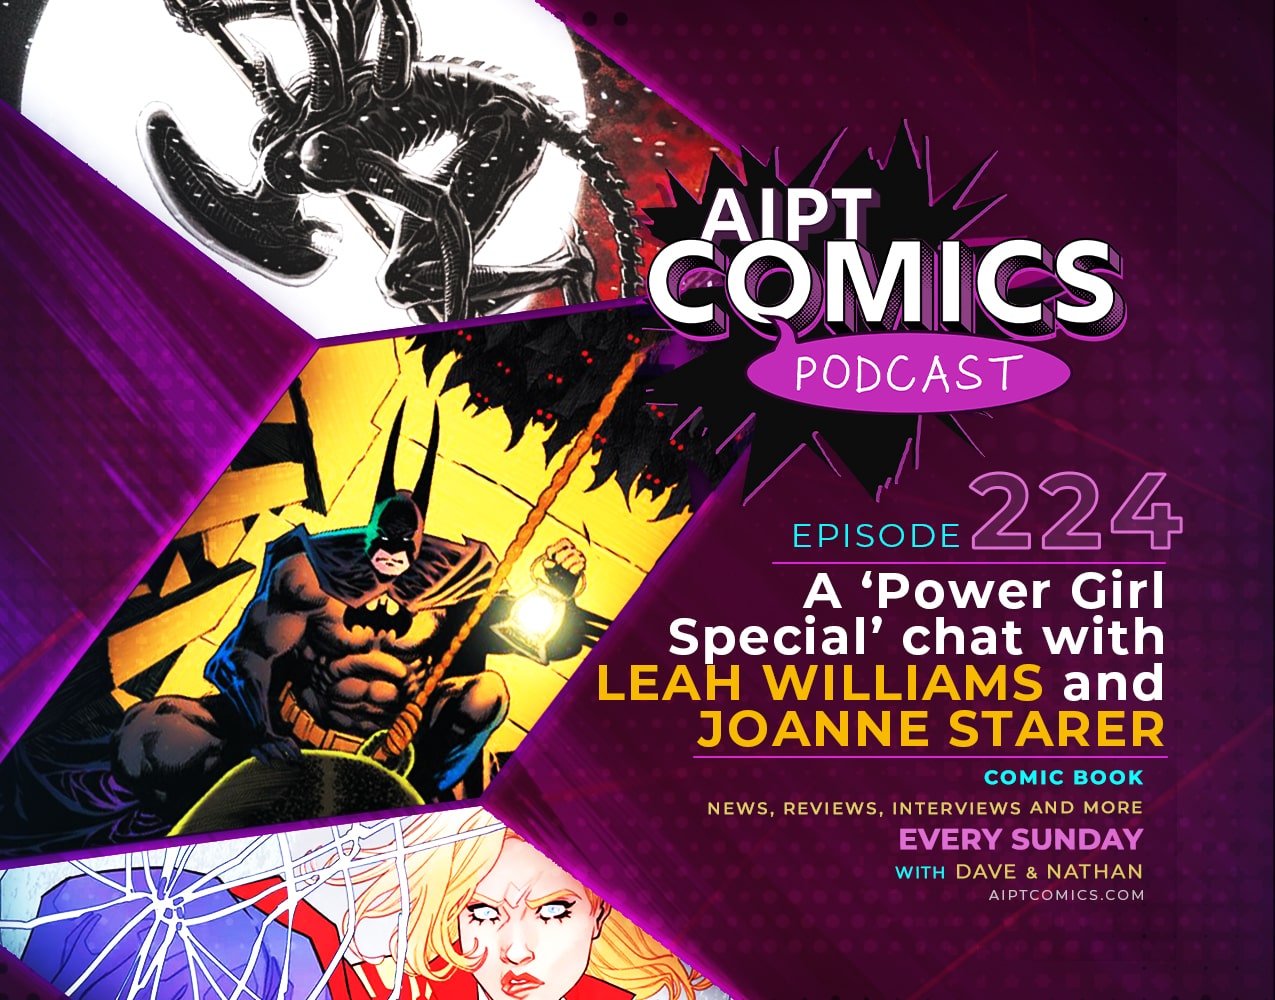 AIPT Comics Podcast episode 224: A ‘Power Girl Special’ chat with Leah Williams and Joanne Starer